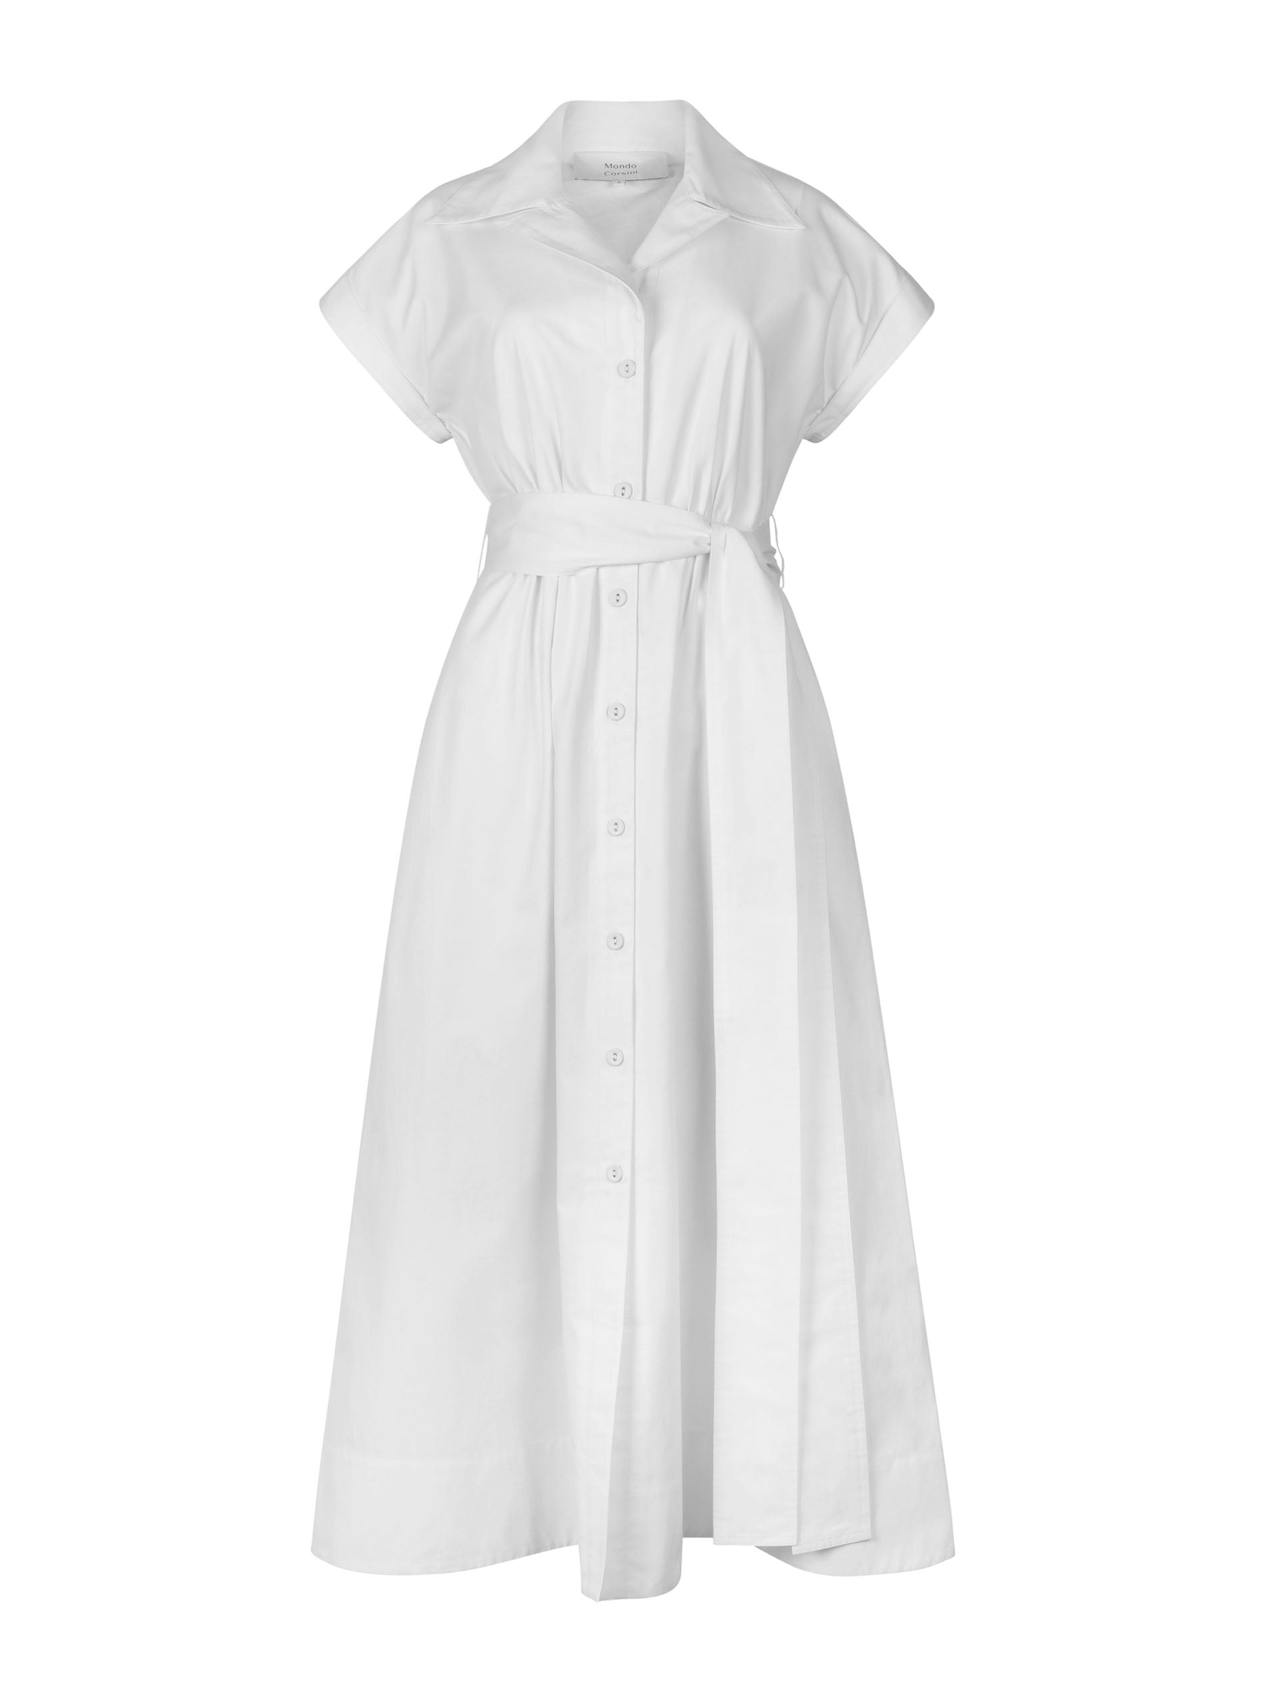 Lucy pearl cotton twill dress